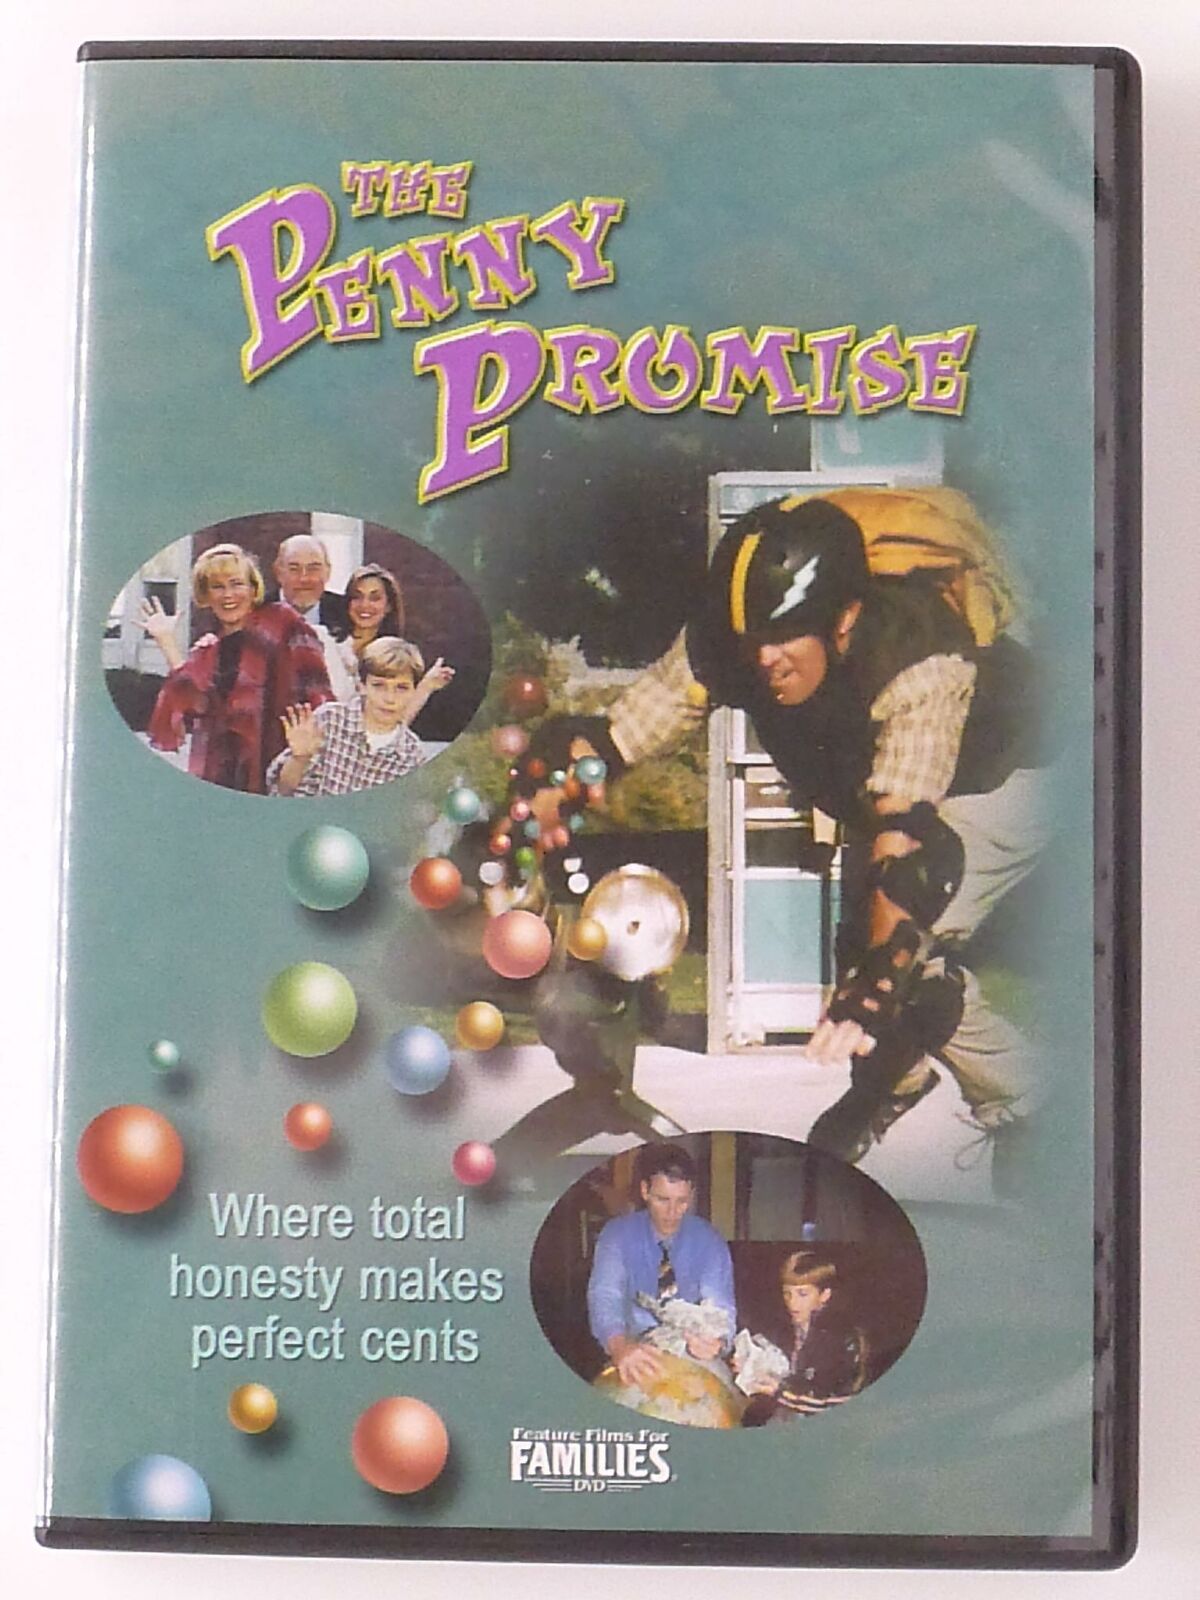 The Penny Promise (DVD, 2001, Families Feature for Families) - G1122